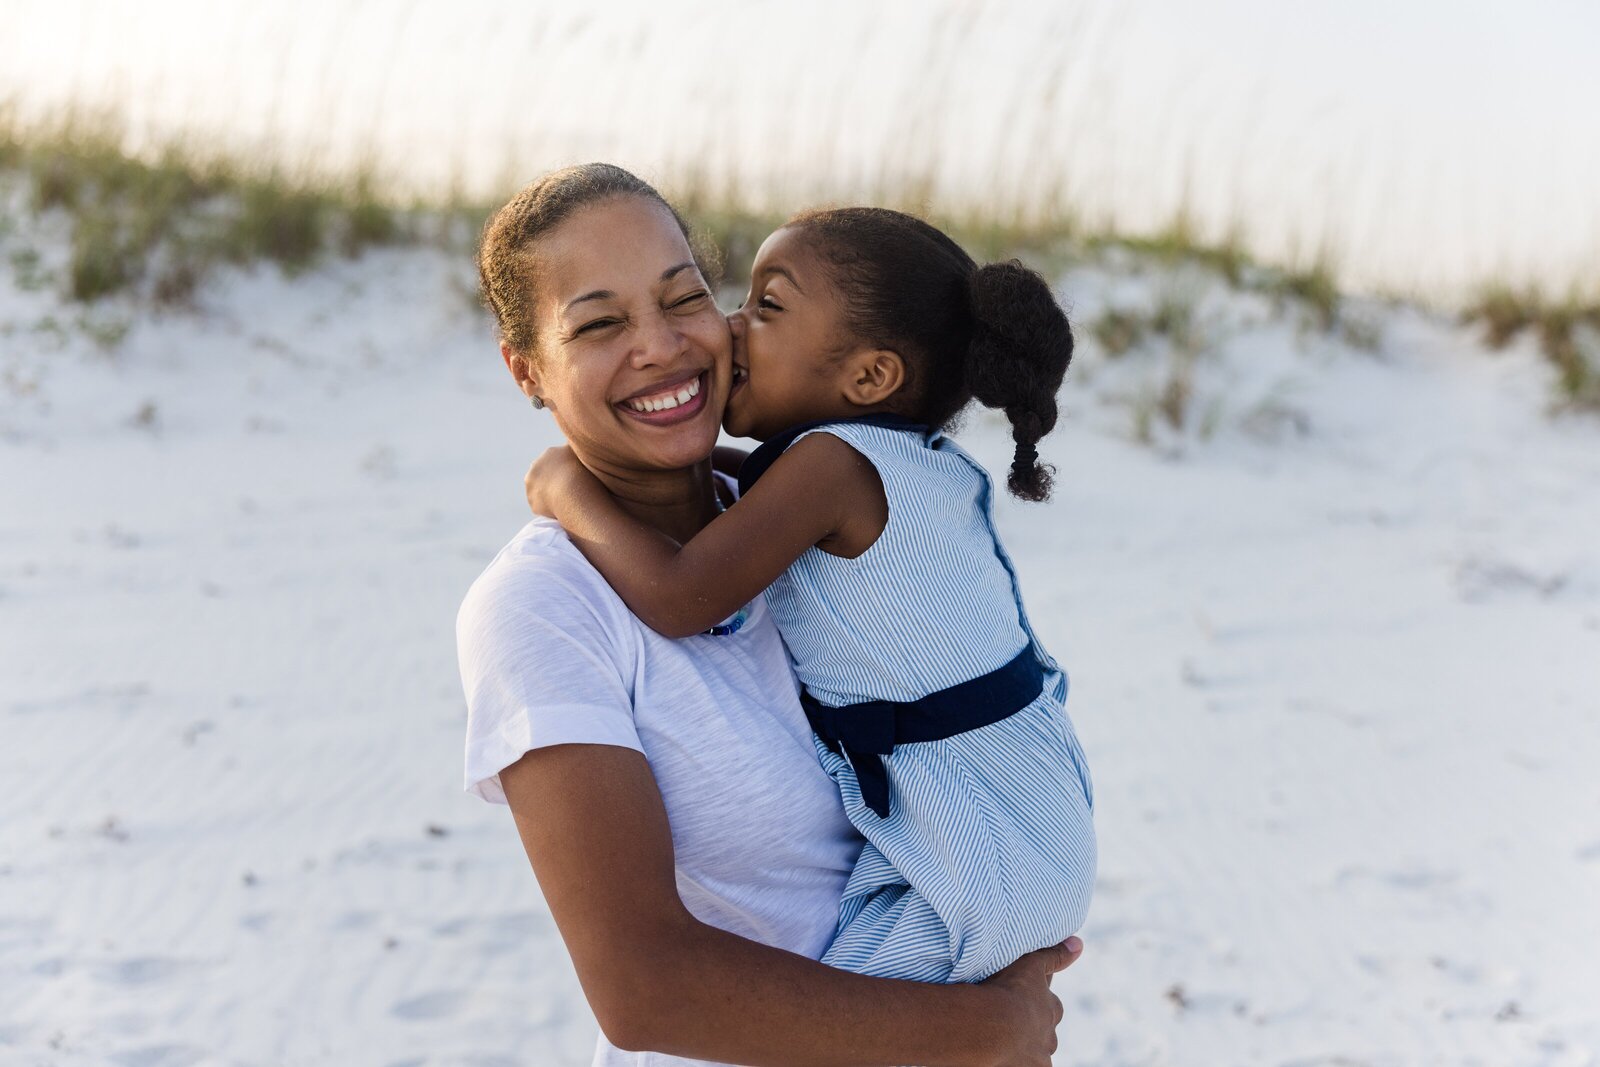 Daughter giving mom a kiss prompt during Pensacola Beach photo session by Jennifer Beal Photography